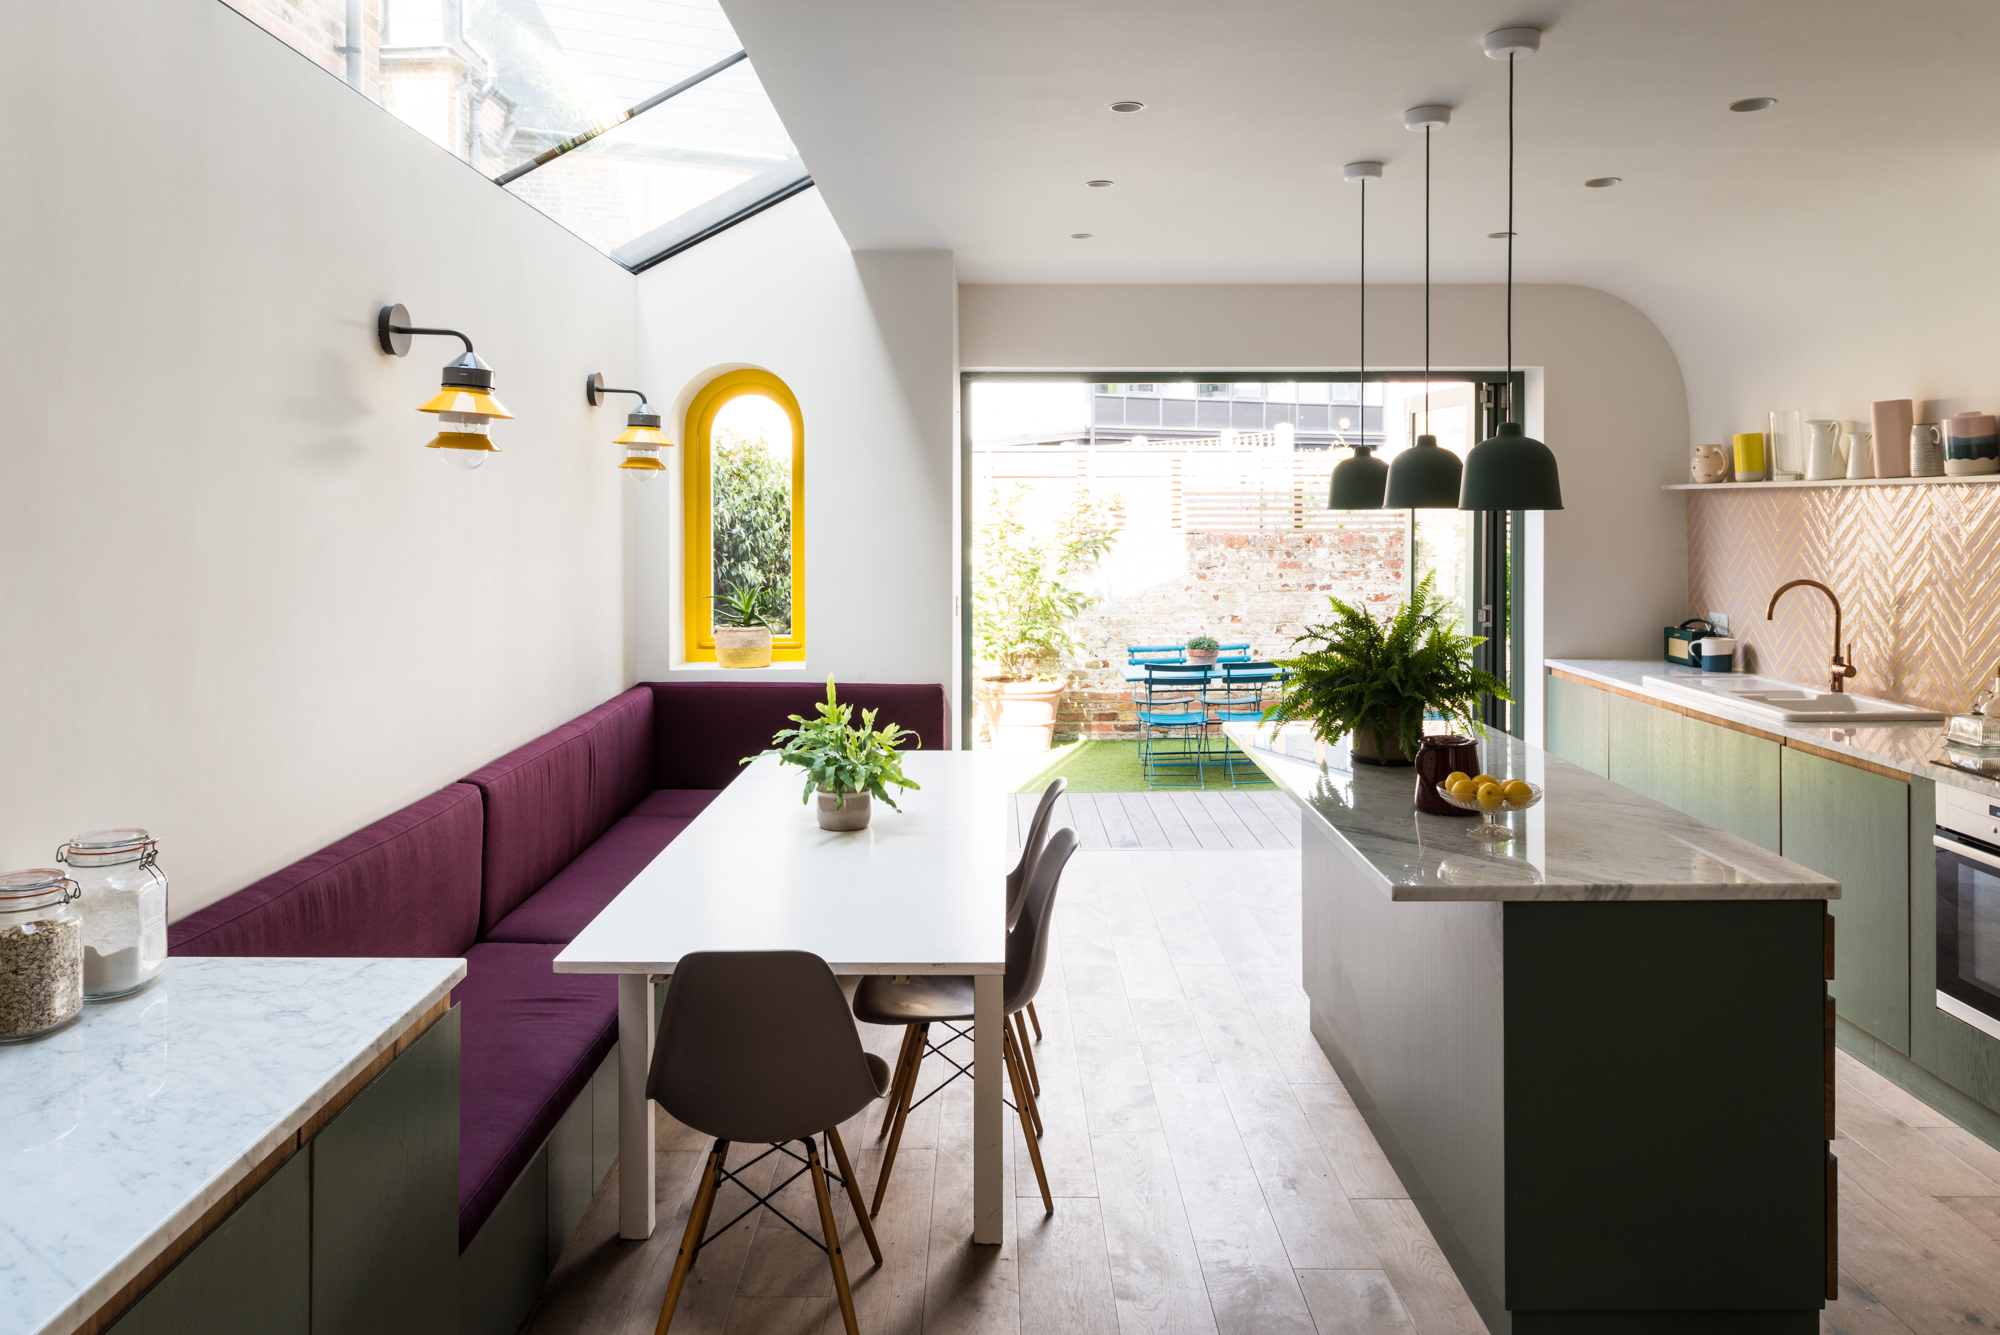 </p> <p>Find your ideal home design pro on designfor-me.com - get matched and see who's interested in your home project. Click image to see more inspiration from our design pros</p> <p>Design by Hugh, architect from Hackney, London</p> <p>#architecture #homedesign #modernhomes #homeinspiration #sideextensions #sidereturn #sideextensionideas #bifolddoors #bifolds #skylights #rooflights </p> <p>